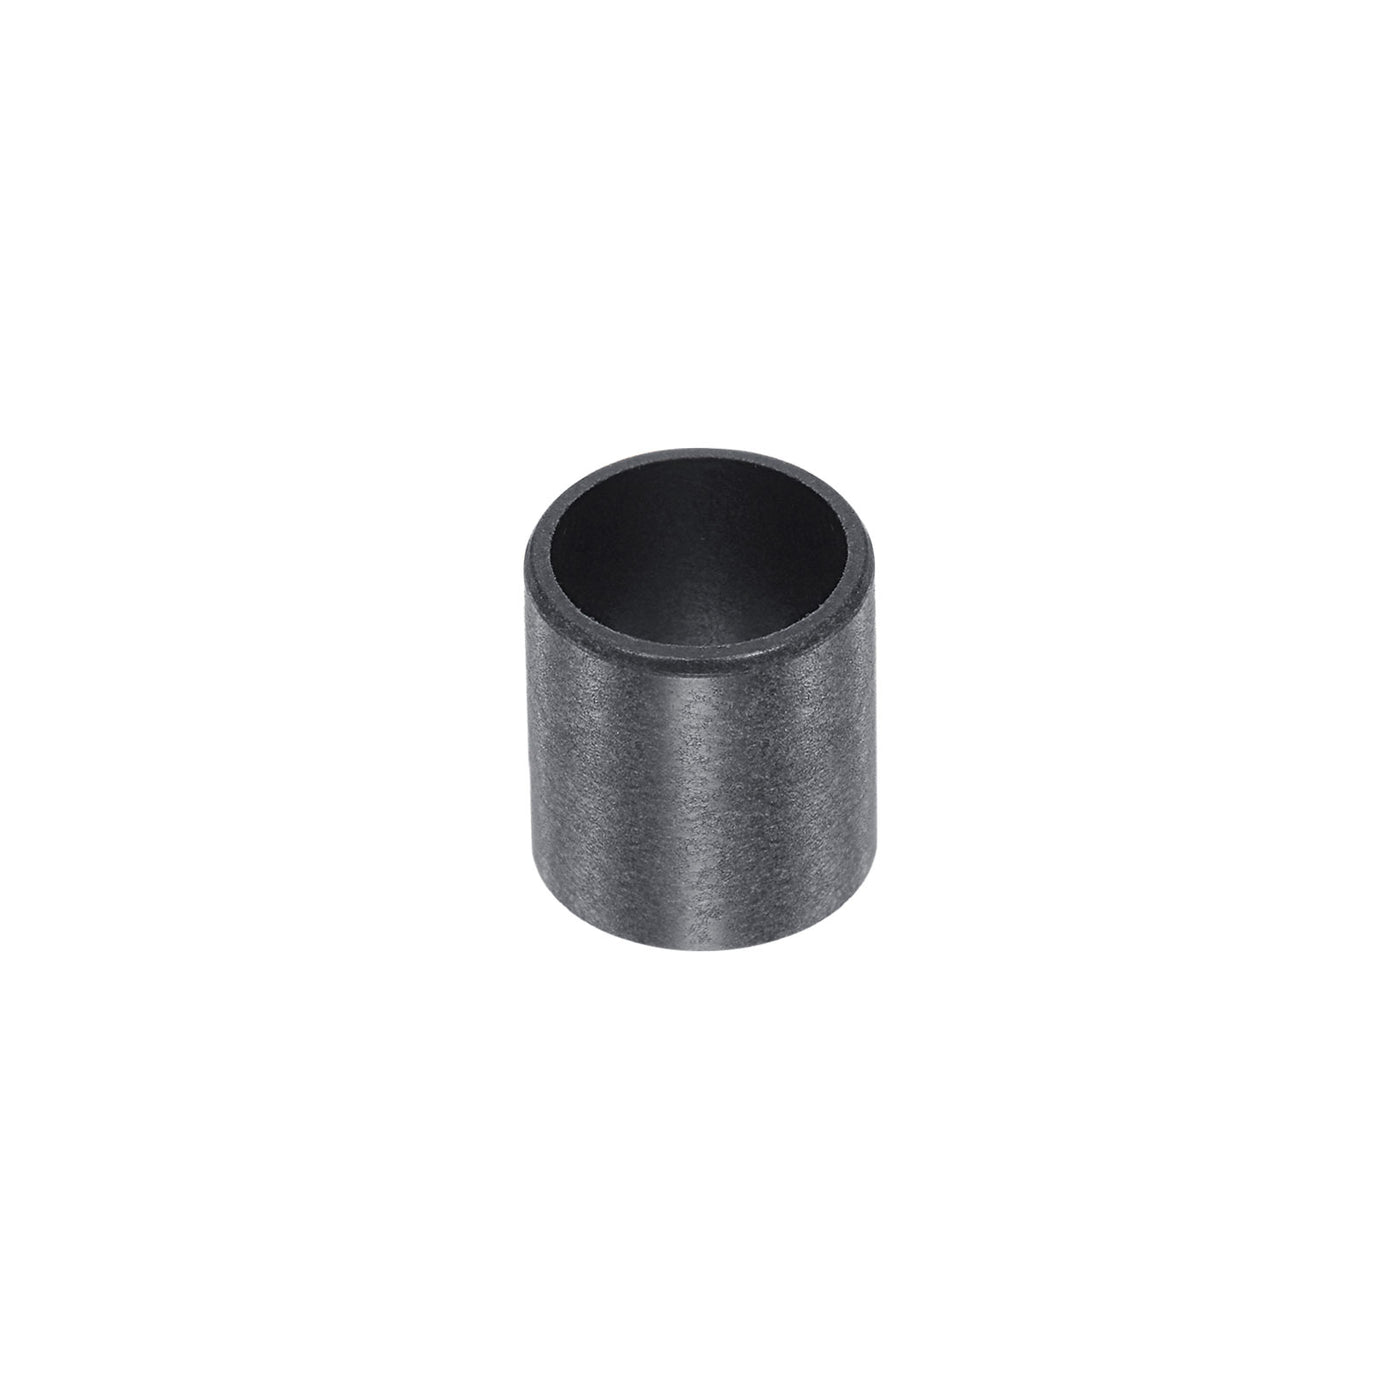 uxcell Uxcell Sleeve Bearings 10mmx12mmx12mm POM Wrapped Oilless Bushings Black